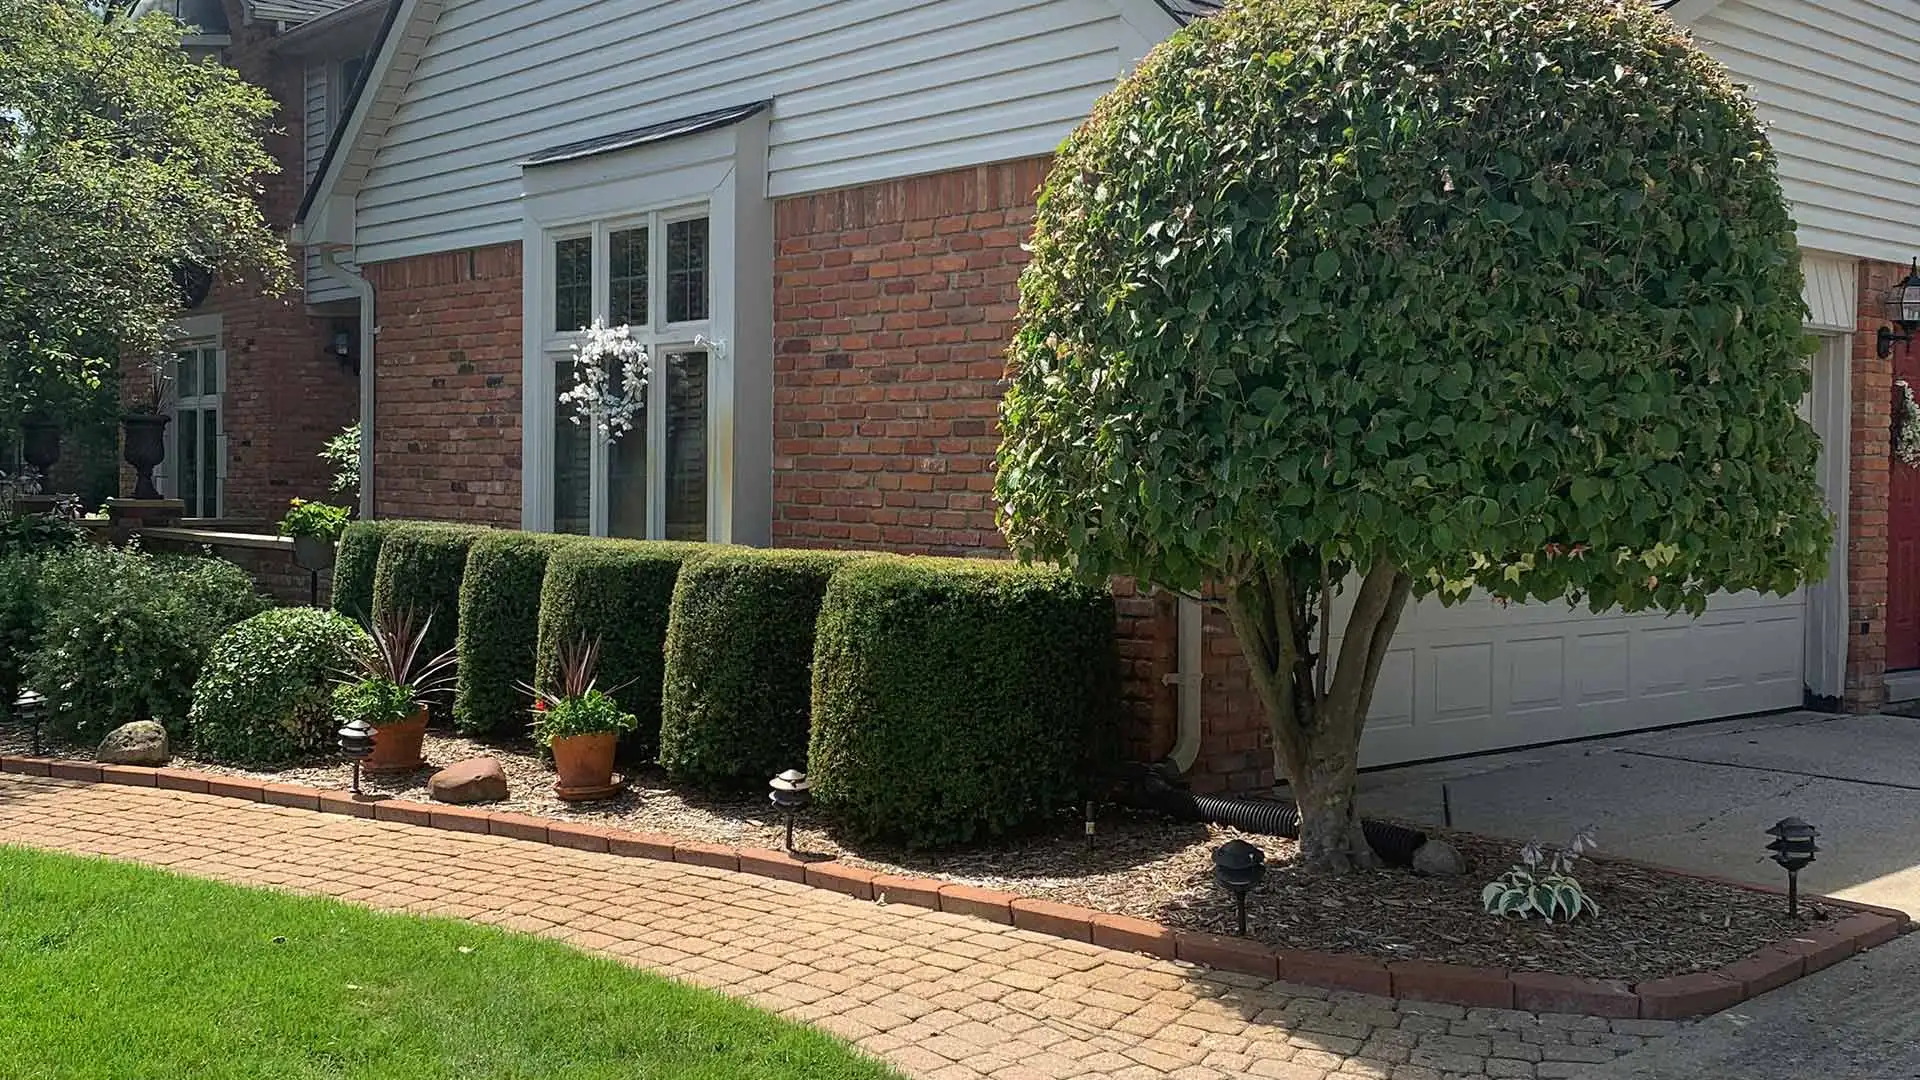 Home in Chesterfield, MI with landscape bed and trimmed shrubs.